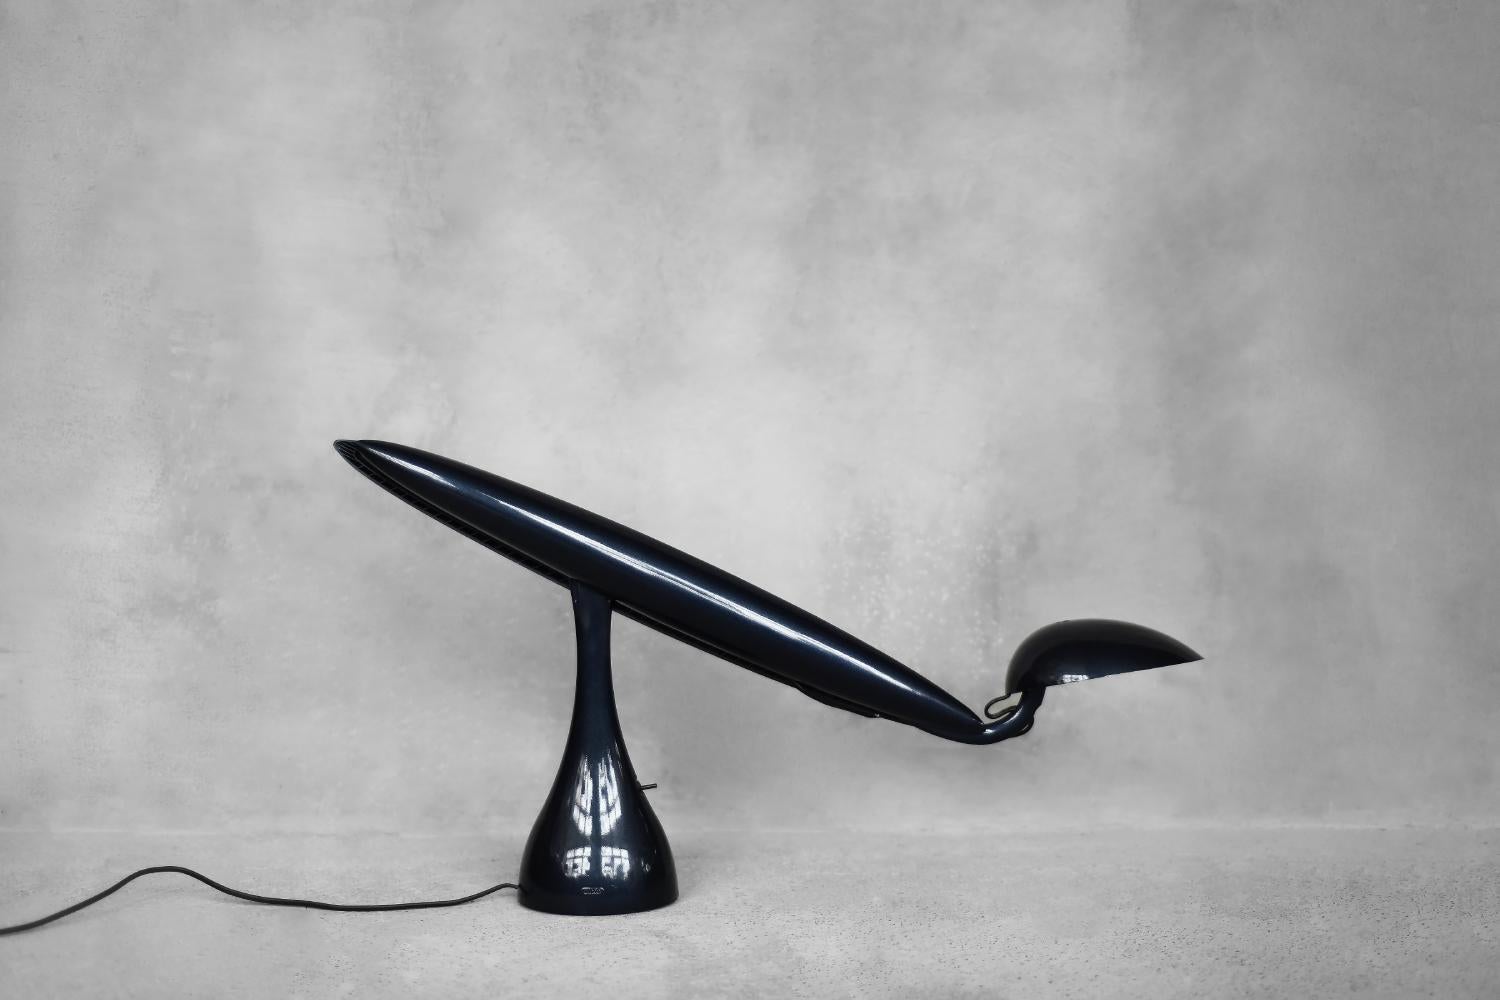 The Heron adjustable desk lamp was designed by Isao Hosoe for the Norwegian manufacturer Luxo in 1994. Isao Hosoe has designed several lamp models that are inspired by bird species. However, it is Heron that is most recognizable due to not only its